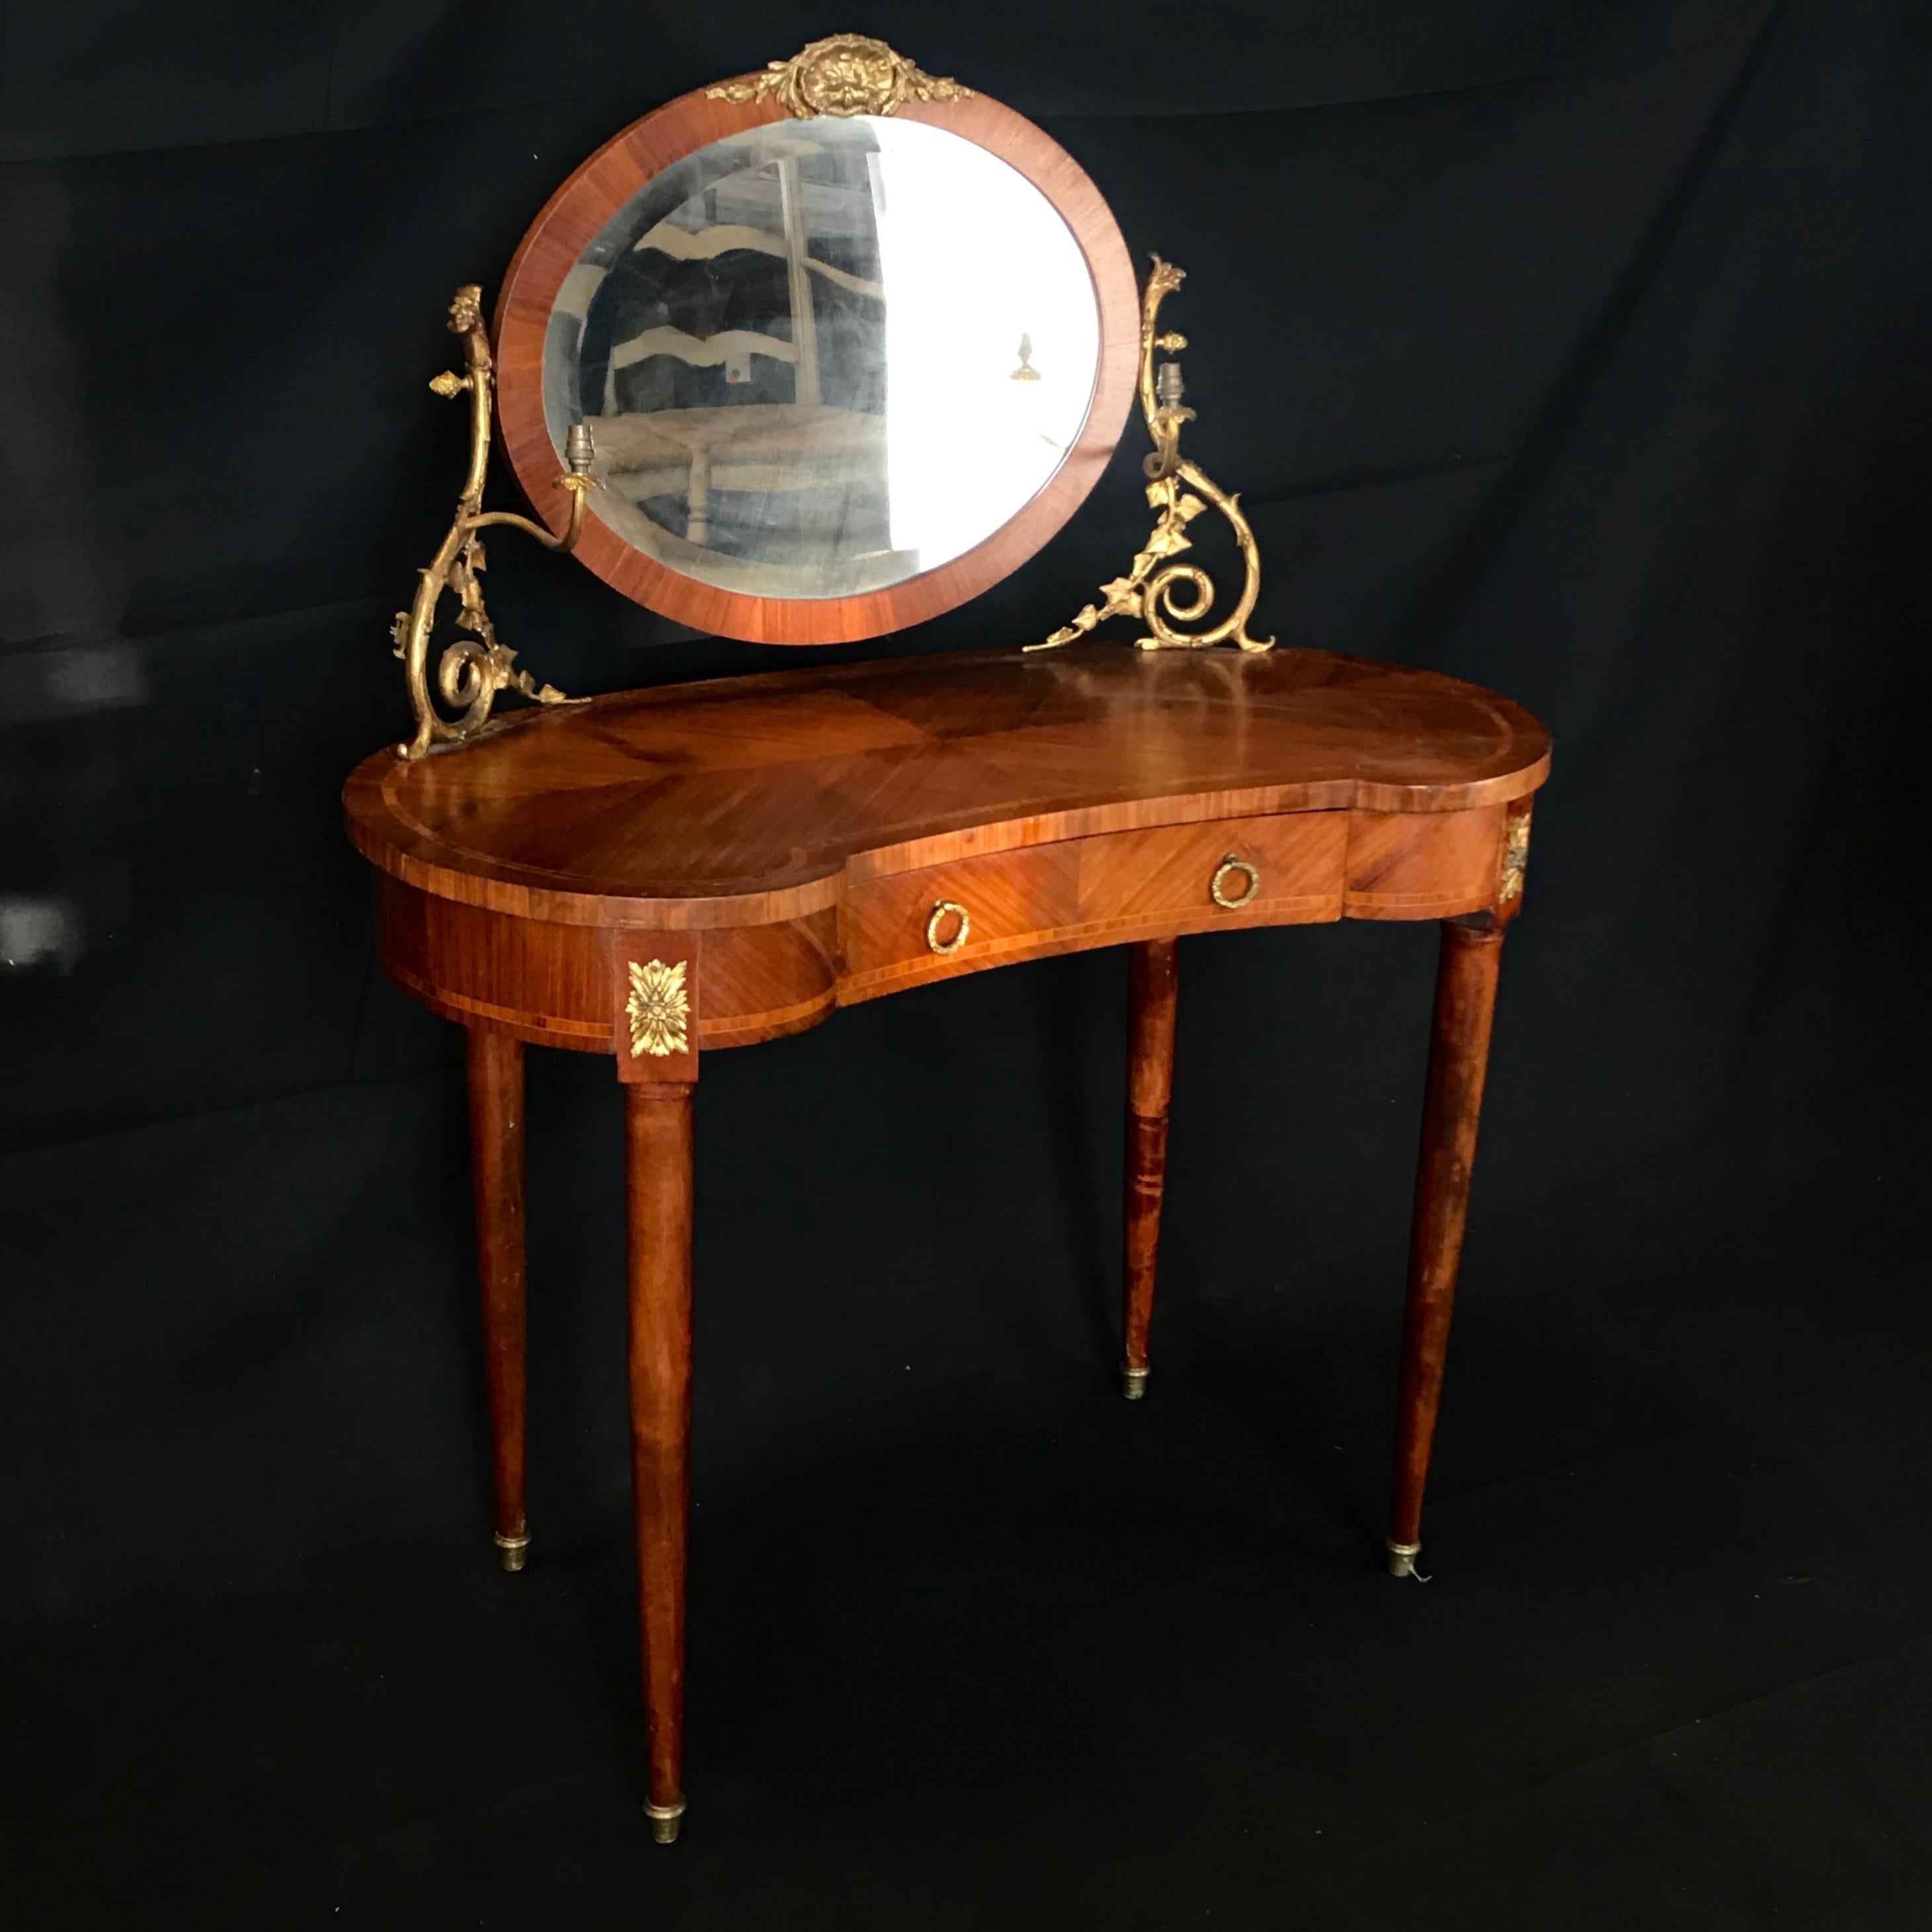 A French inlaid fine dressing table having a kidney shaped top with gilt bronze encadrement and a superstructure supporting an oval mirror flanked by gilt bronze scrolling candle arms, above one center frieze drawer and raised on delicate tapering